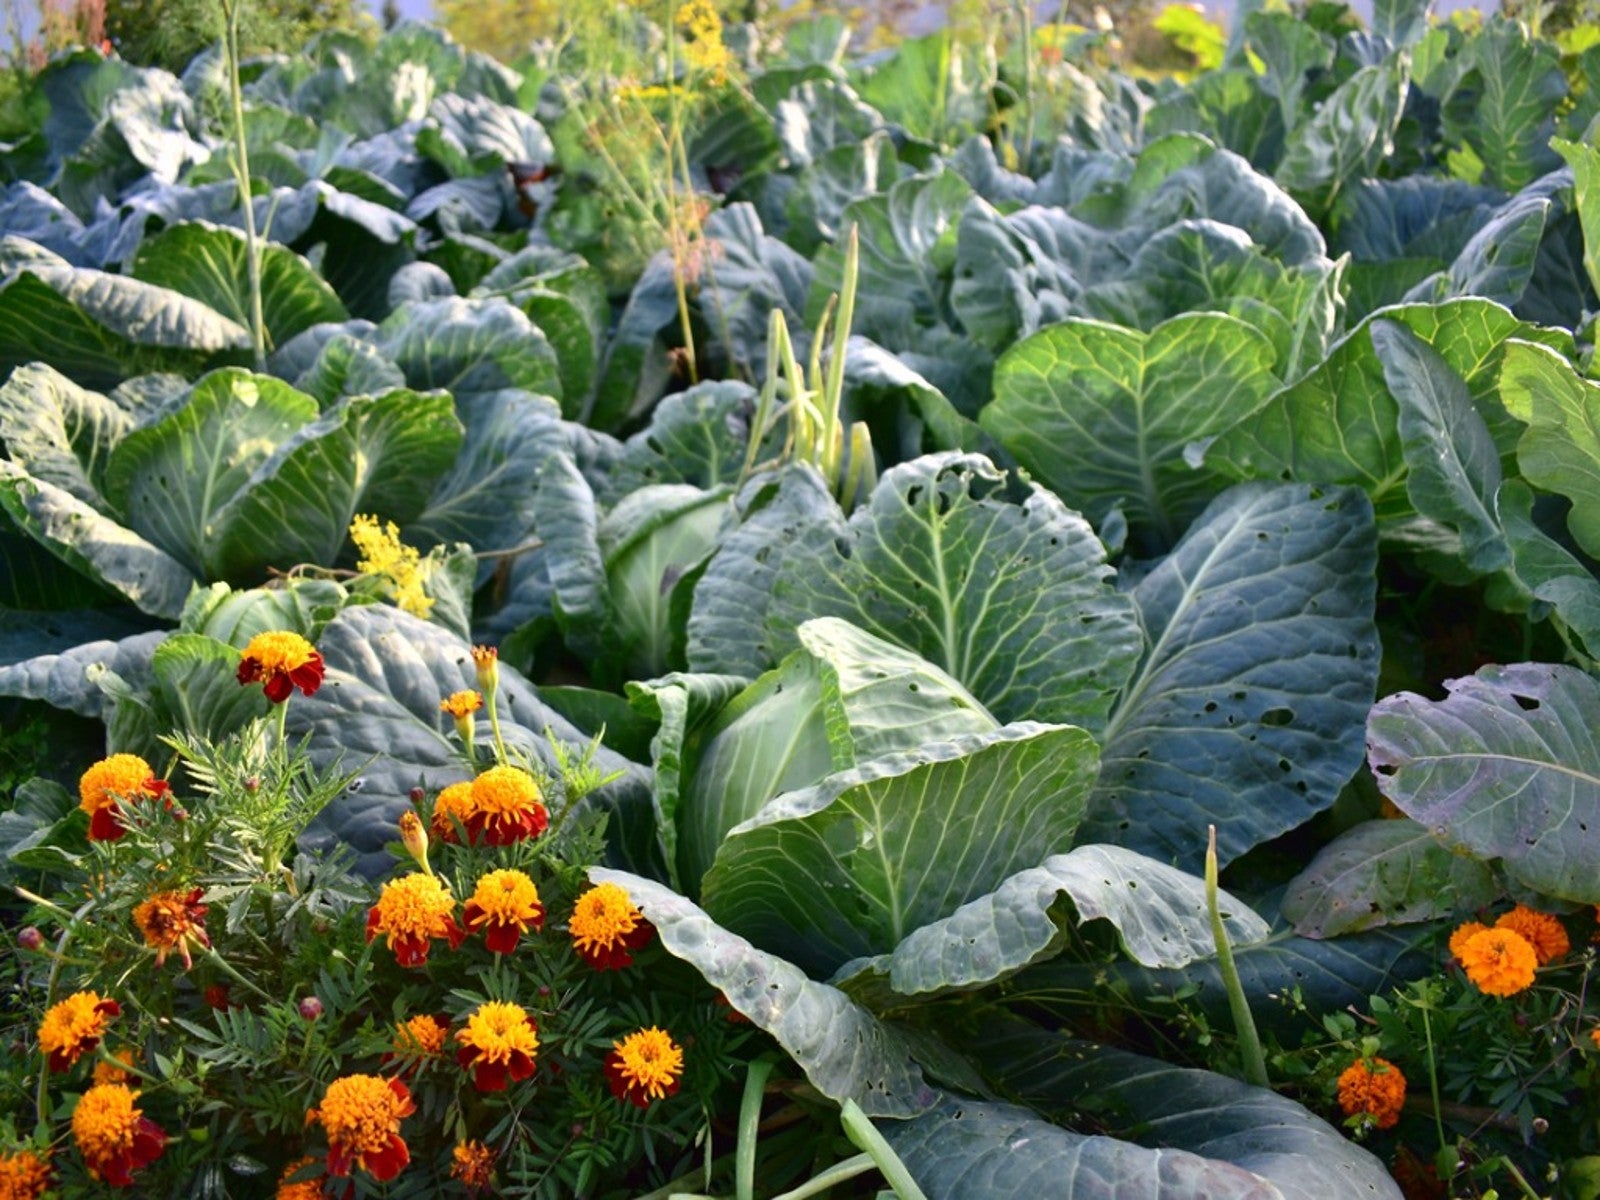 Image of Marigolds and beets